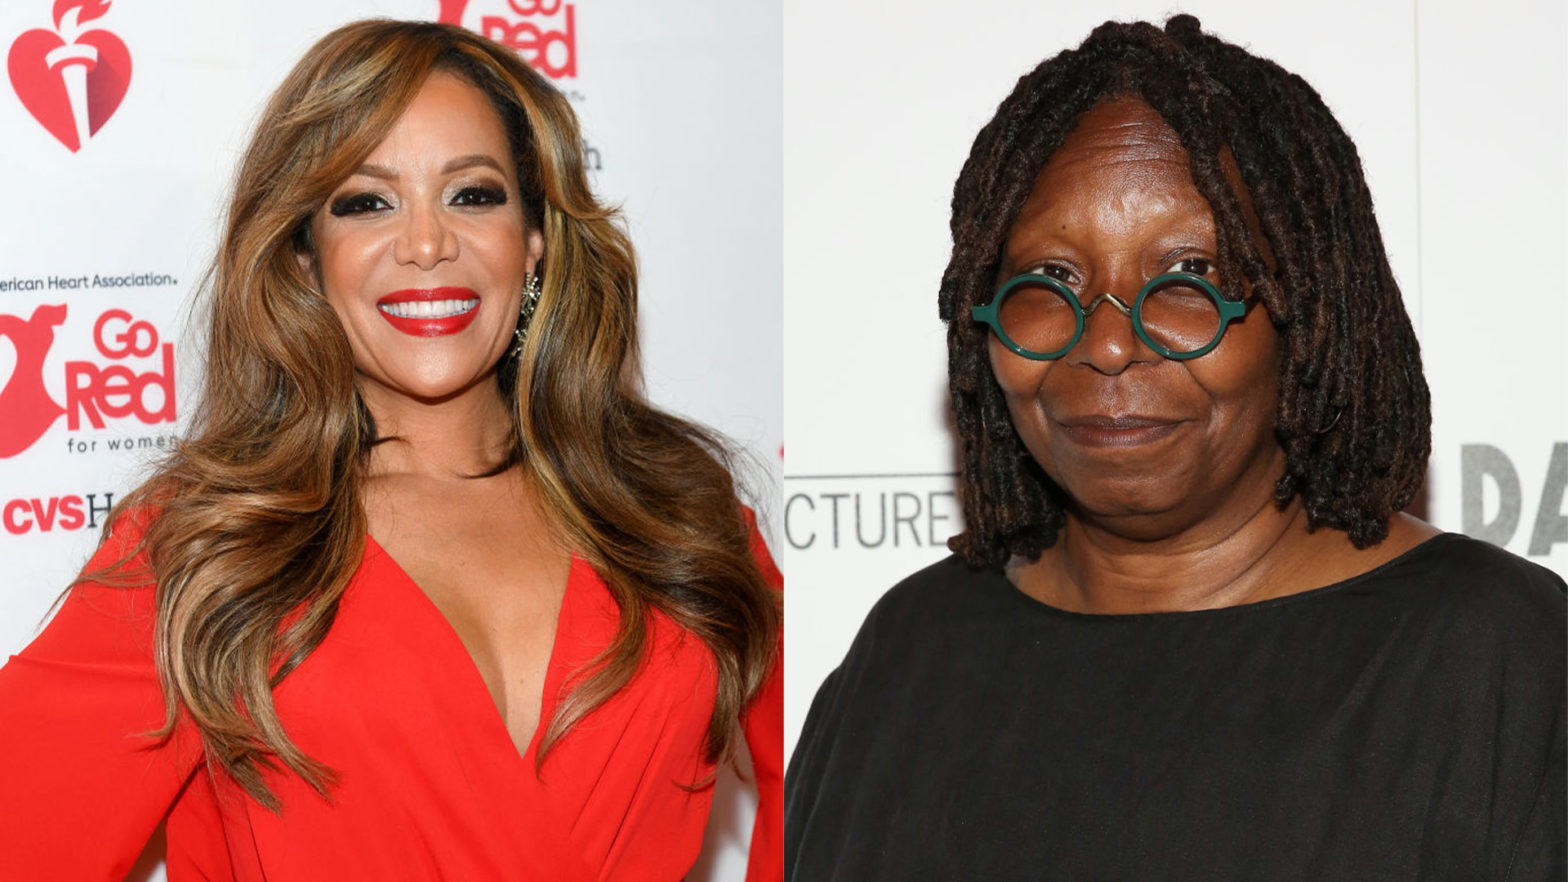 Sunny Hostin Goes Against Whoopi Goldberg’s View Of College Education Being That Those Without It ‘Make 80 Percent Less Money’